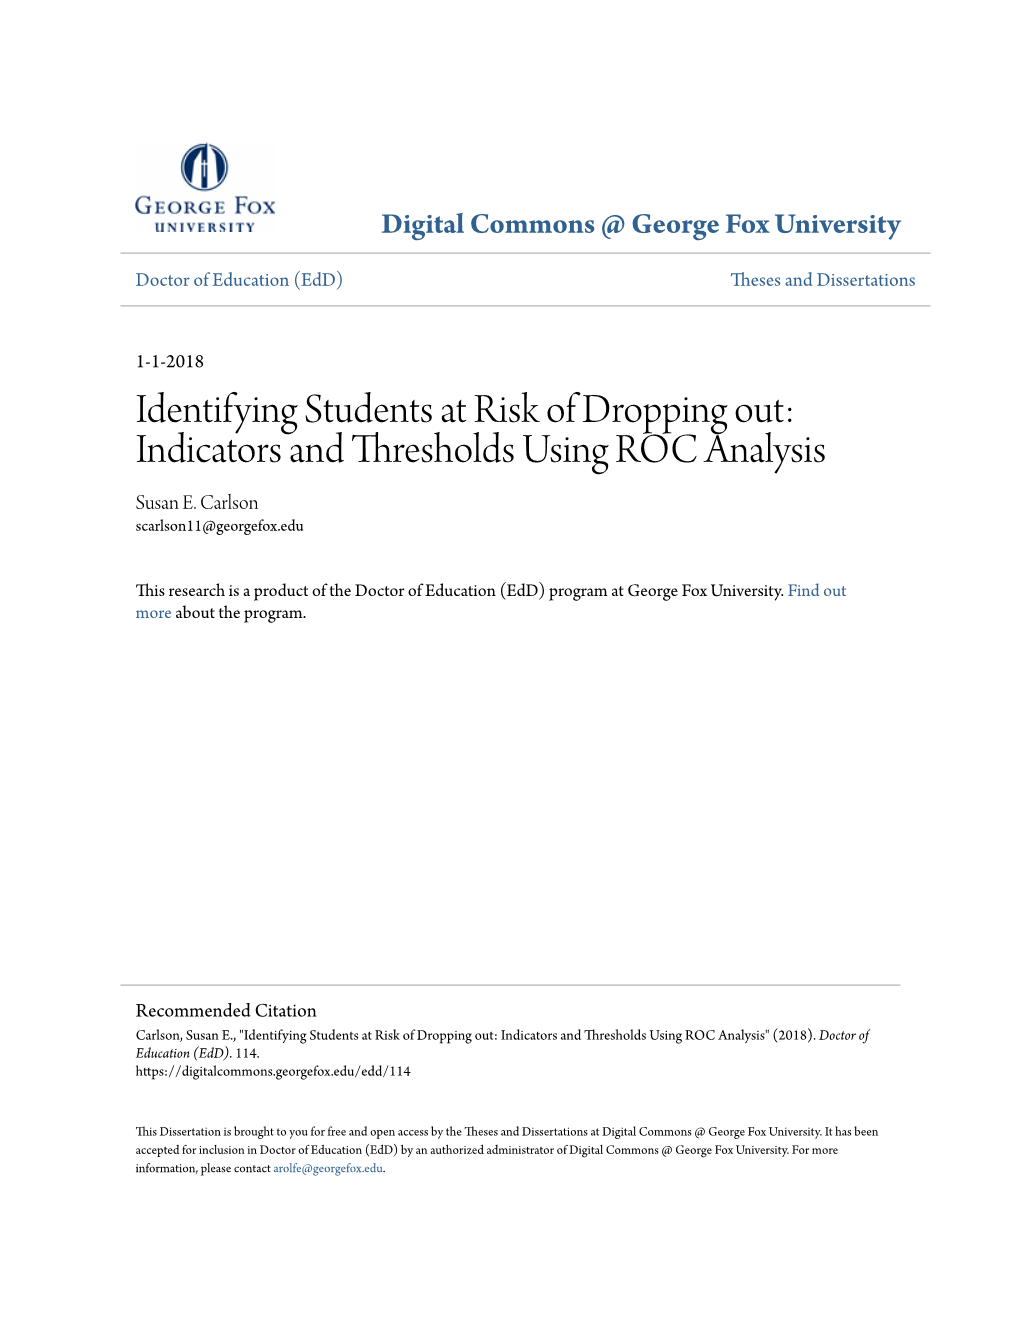 Identifying Students at Risk of Dropping Out: Indicators and Thresholds Using ROC Analysis Susan E